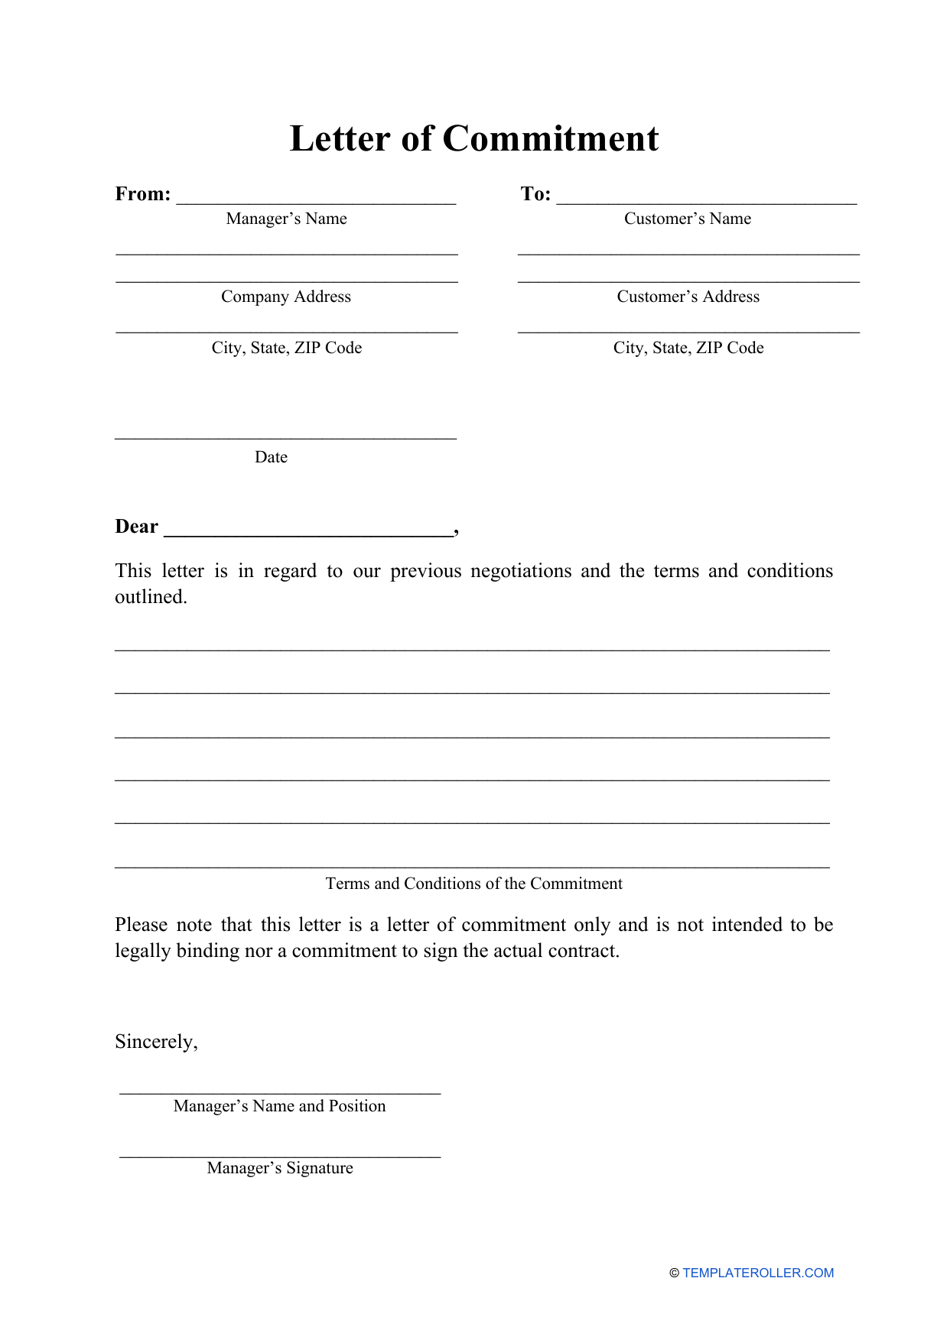 Letter of Commitment Template Download Printable PDF  Templateroller Regarding promise to pay agreement template